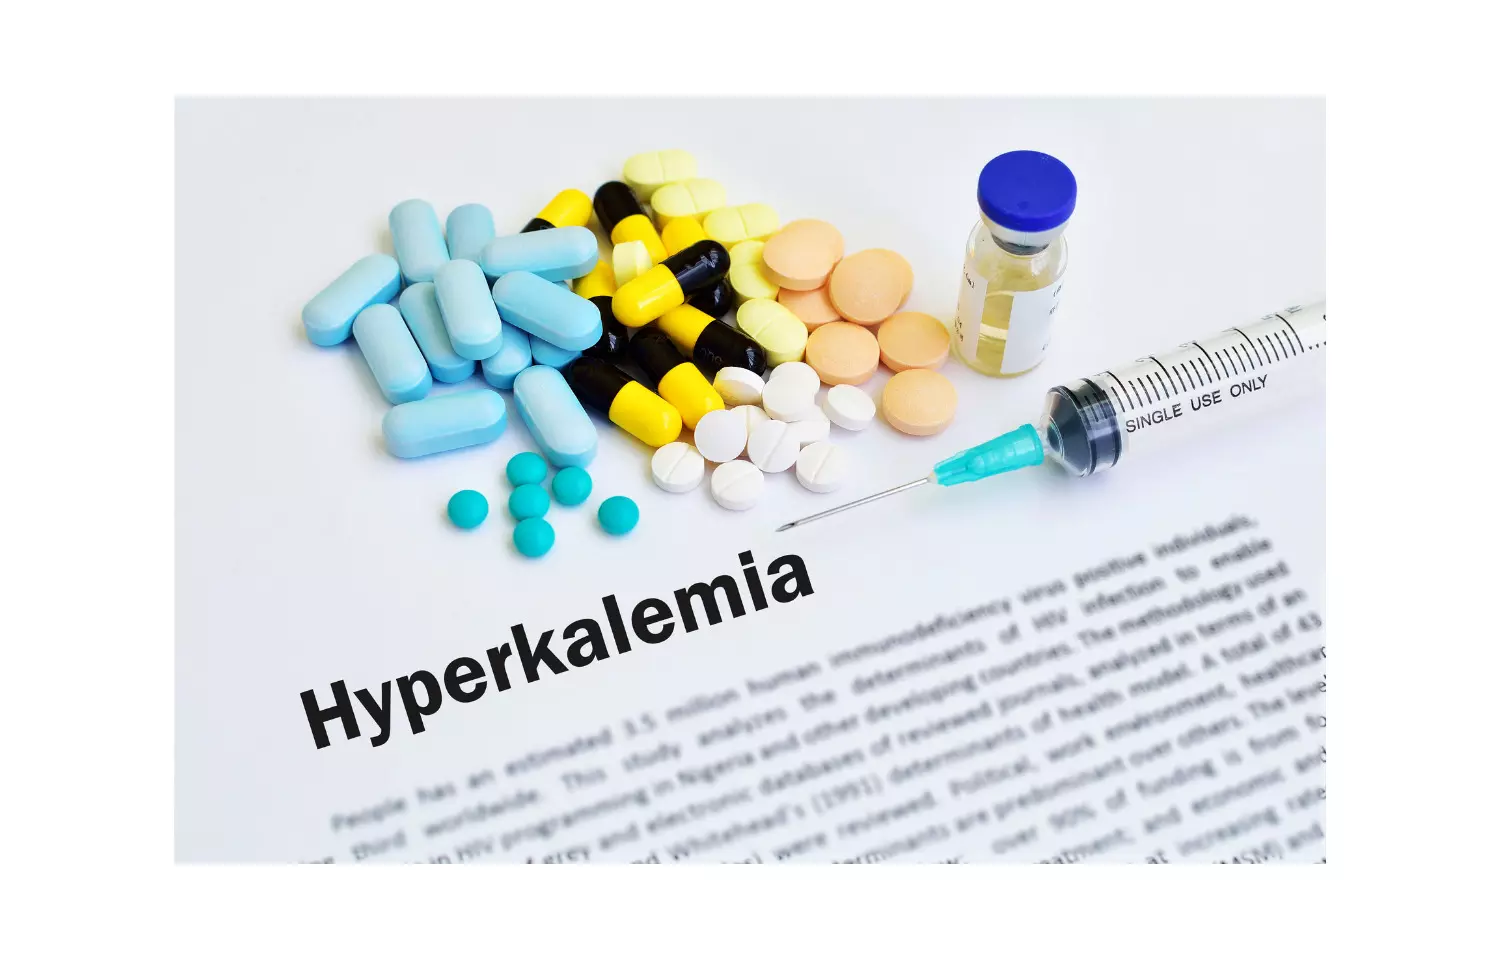 Stopping Renin-angiotensin inhibitors in hyperkalemia lowers  recurrence risk but not CV events